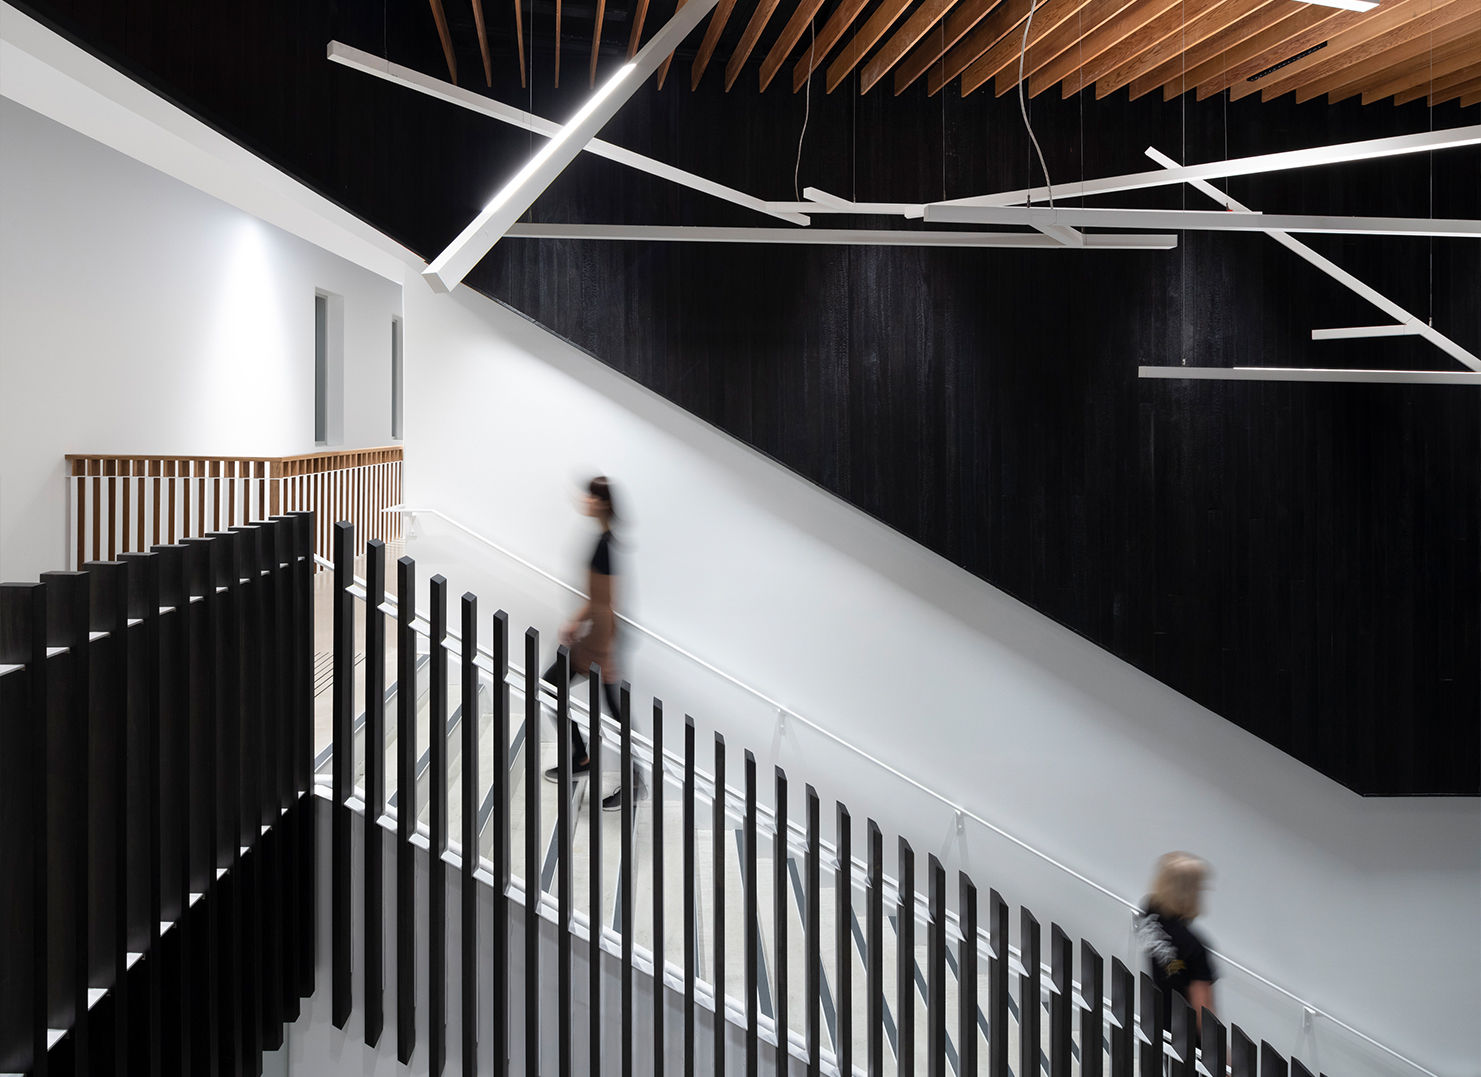 Blurred figures walk up a central staircase. Above, a feature ceiling with wood slats and multiple long, rectangular pendant lights.